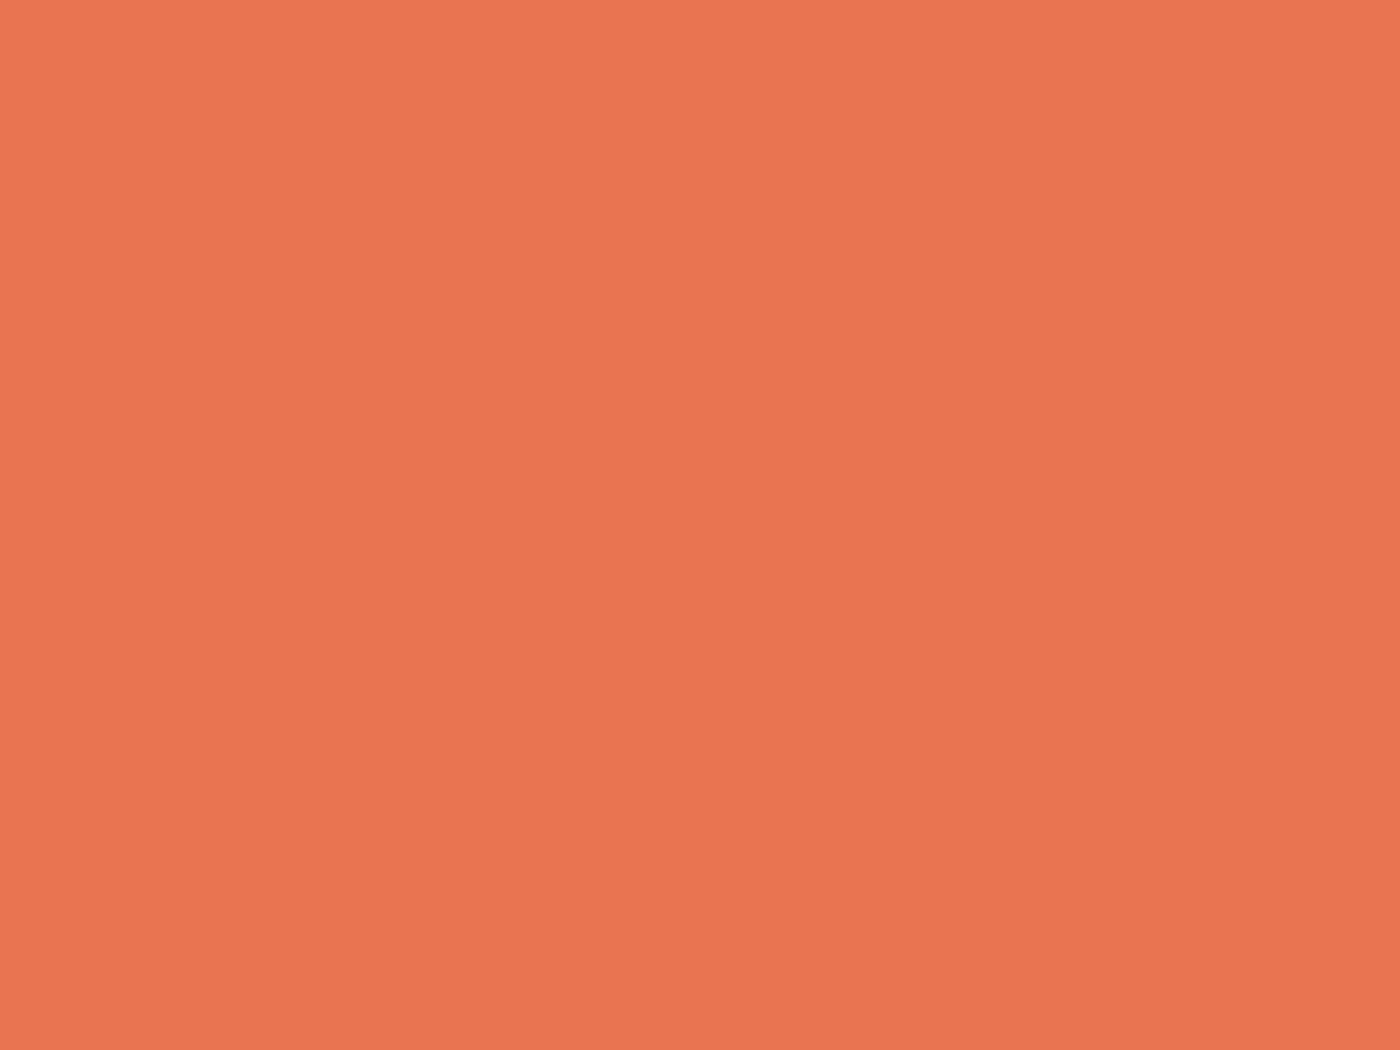 1400x1050 Light Red Ochre Solid Color Background